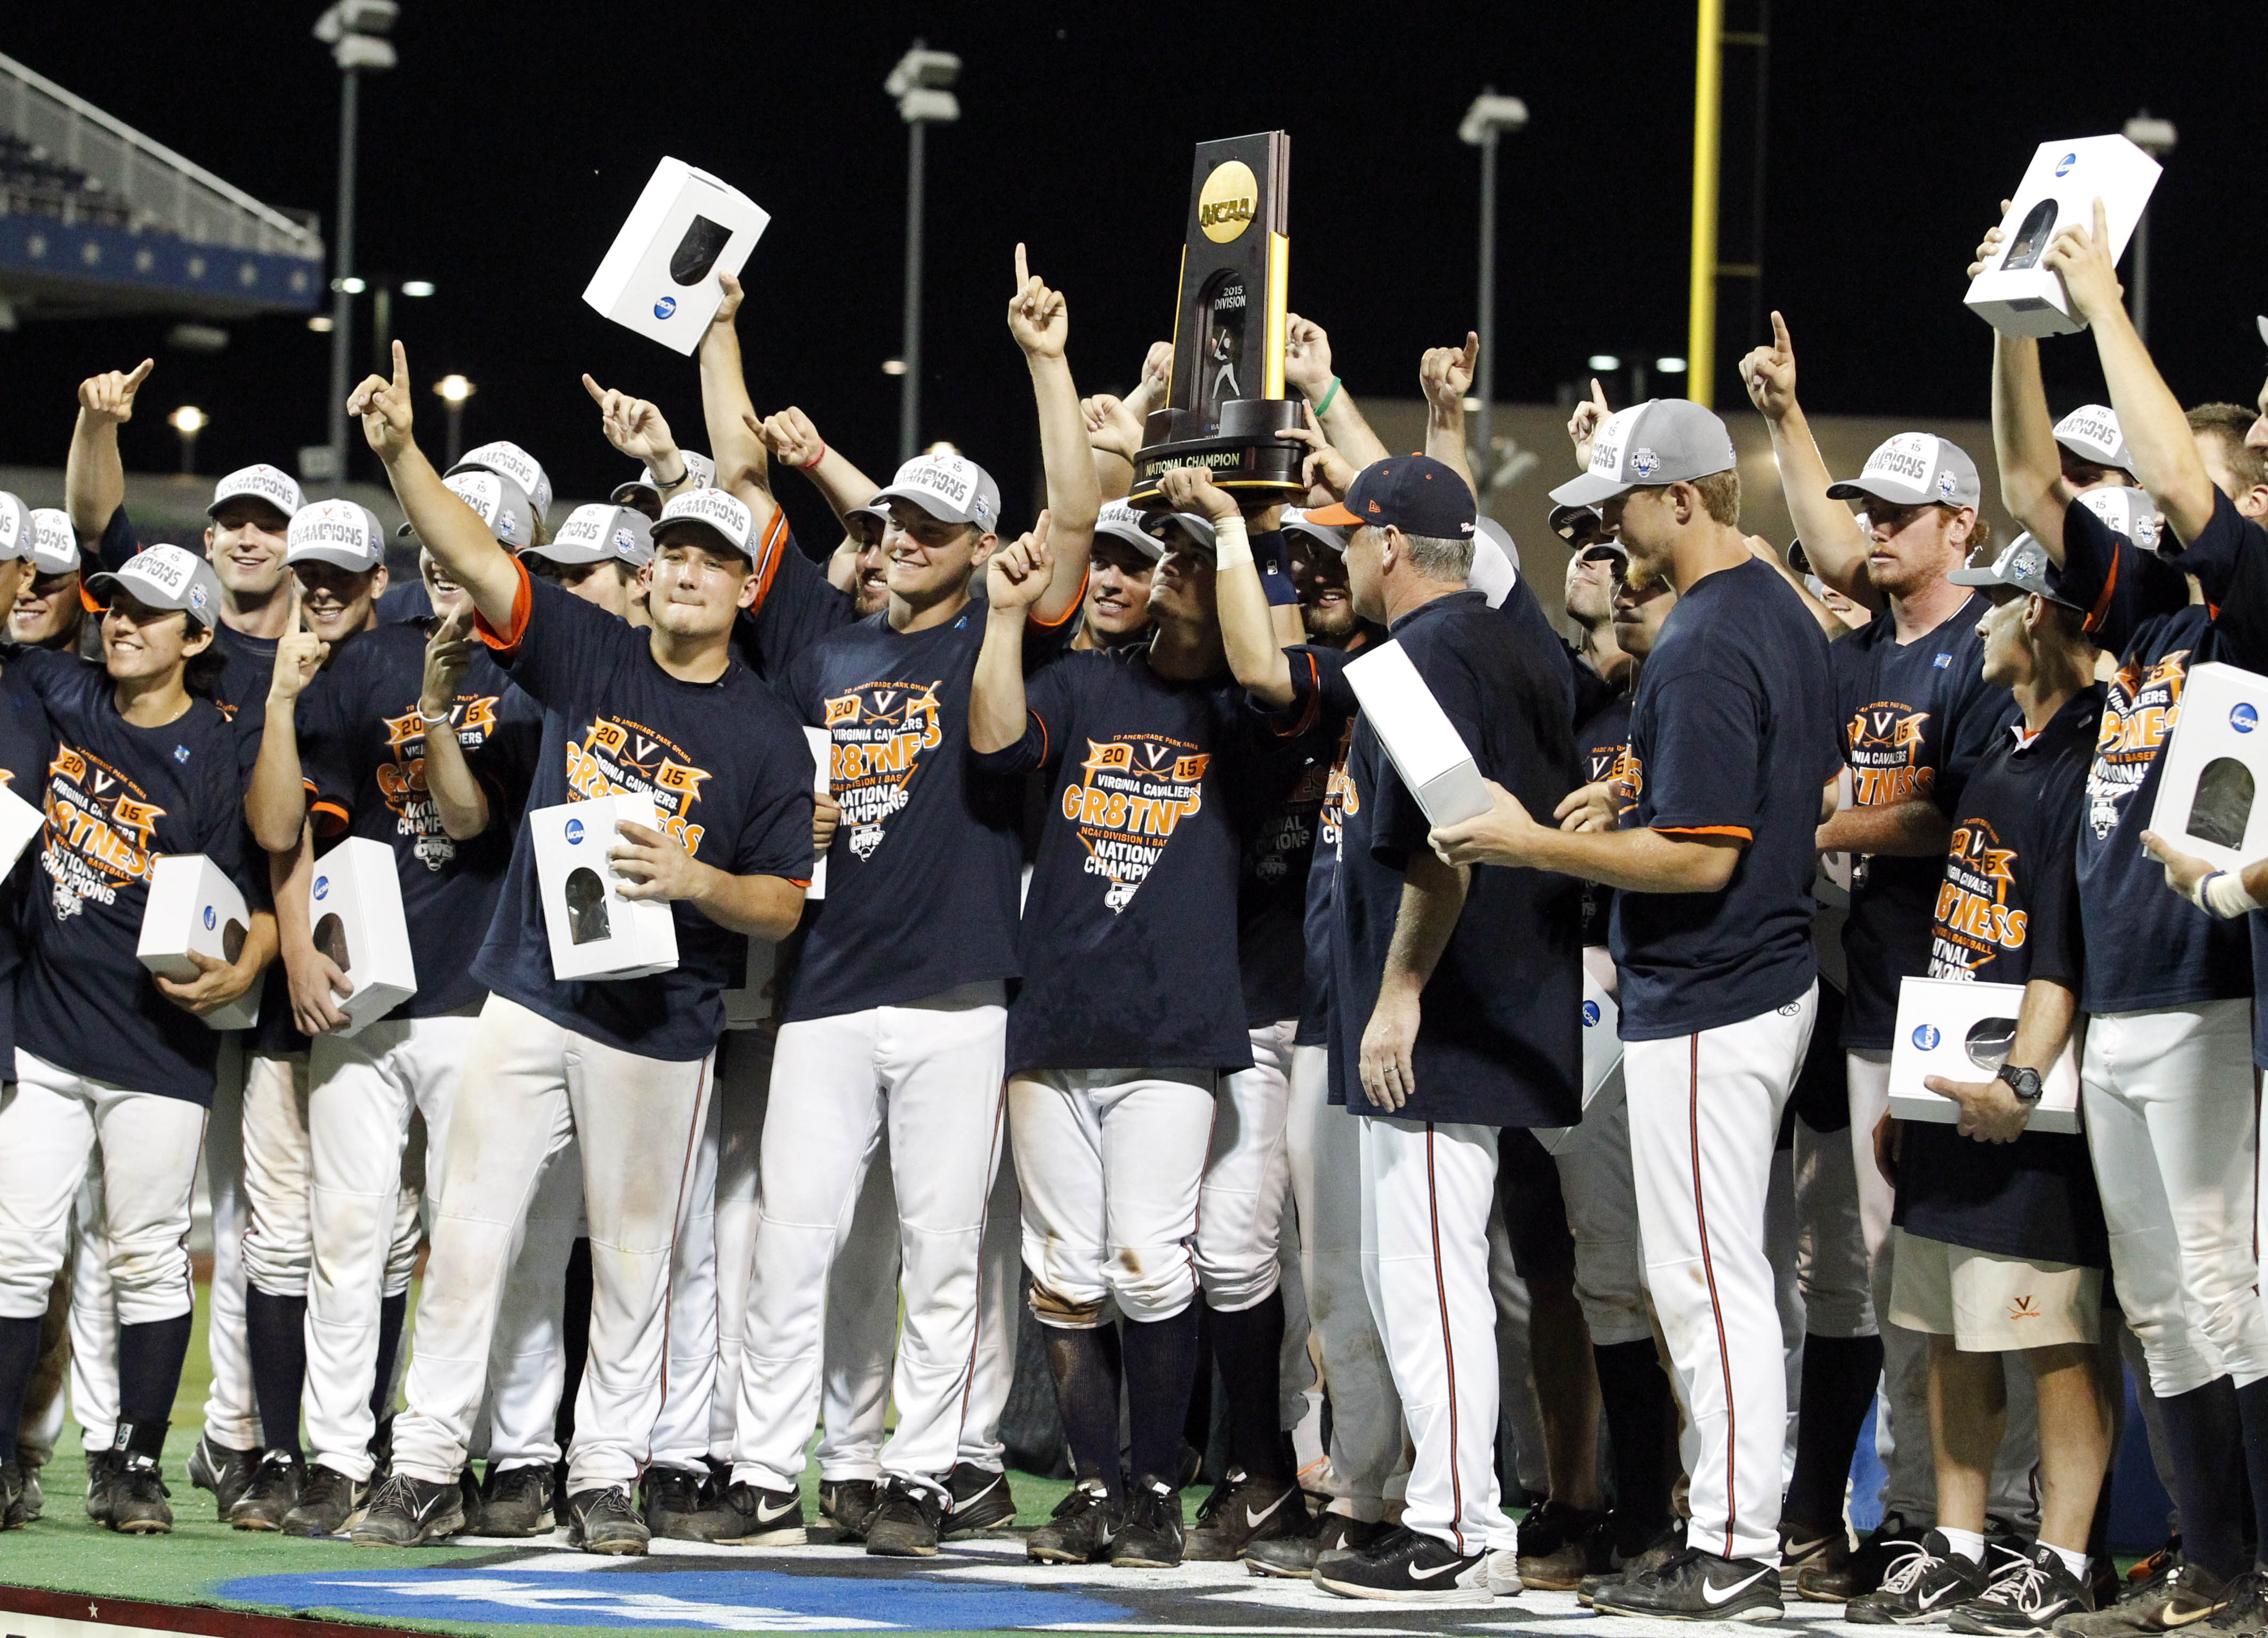 Virginia won the College World Series and took the happiest photos on